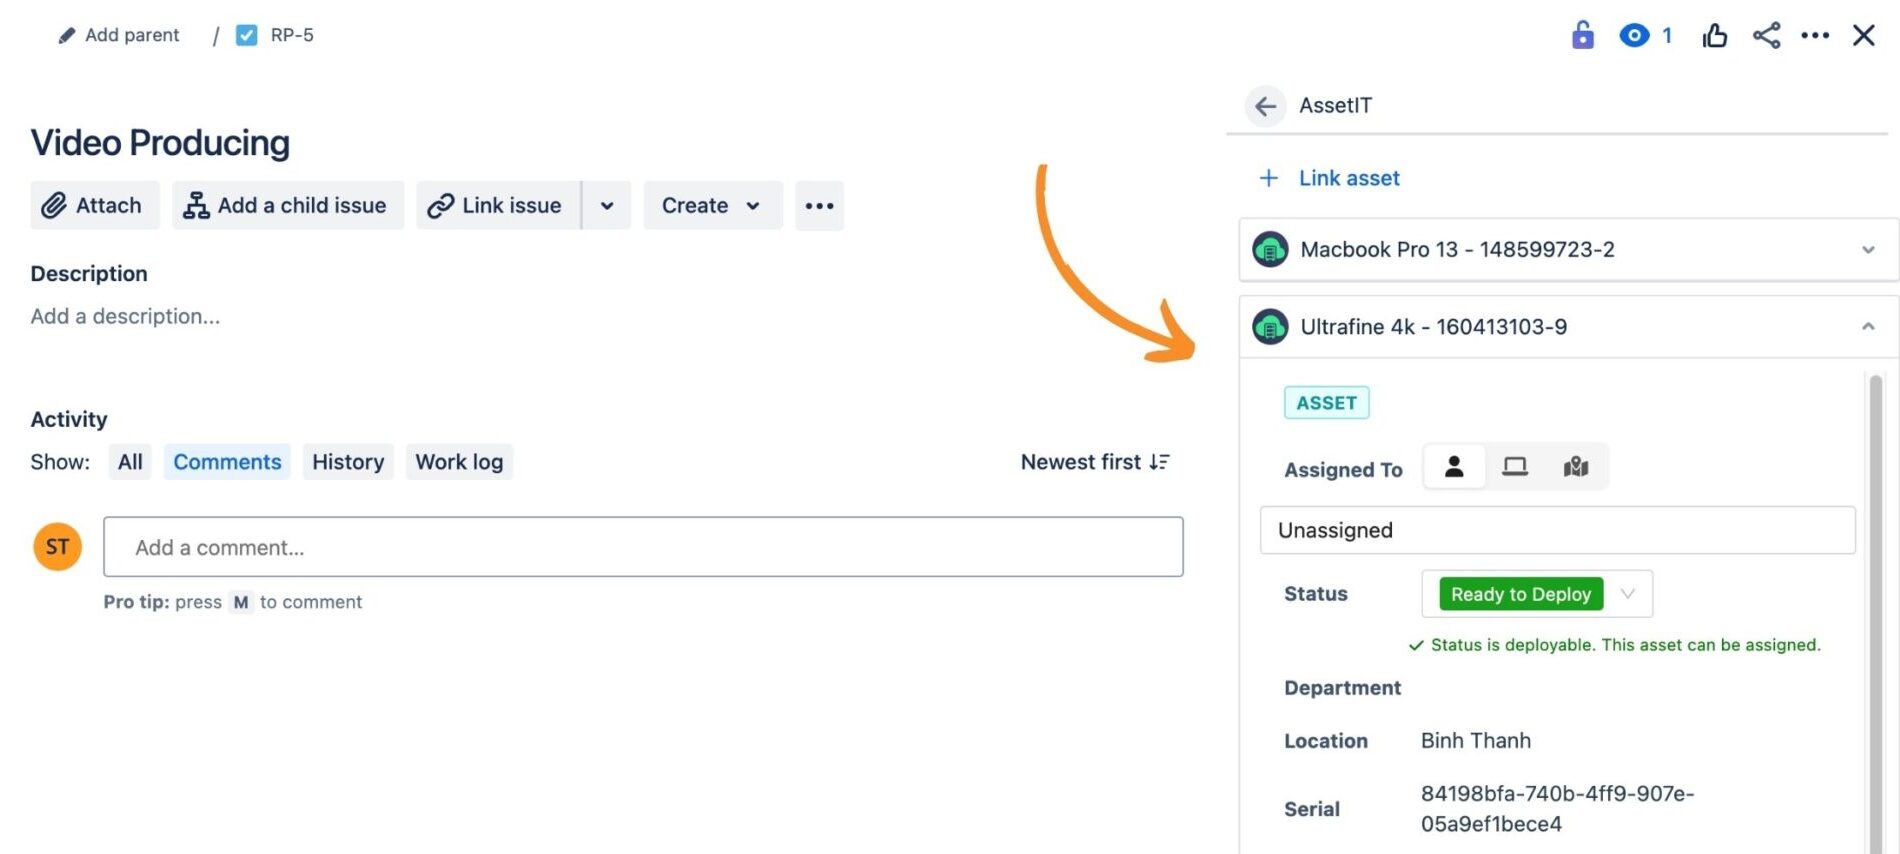 Assets linked to Jira project